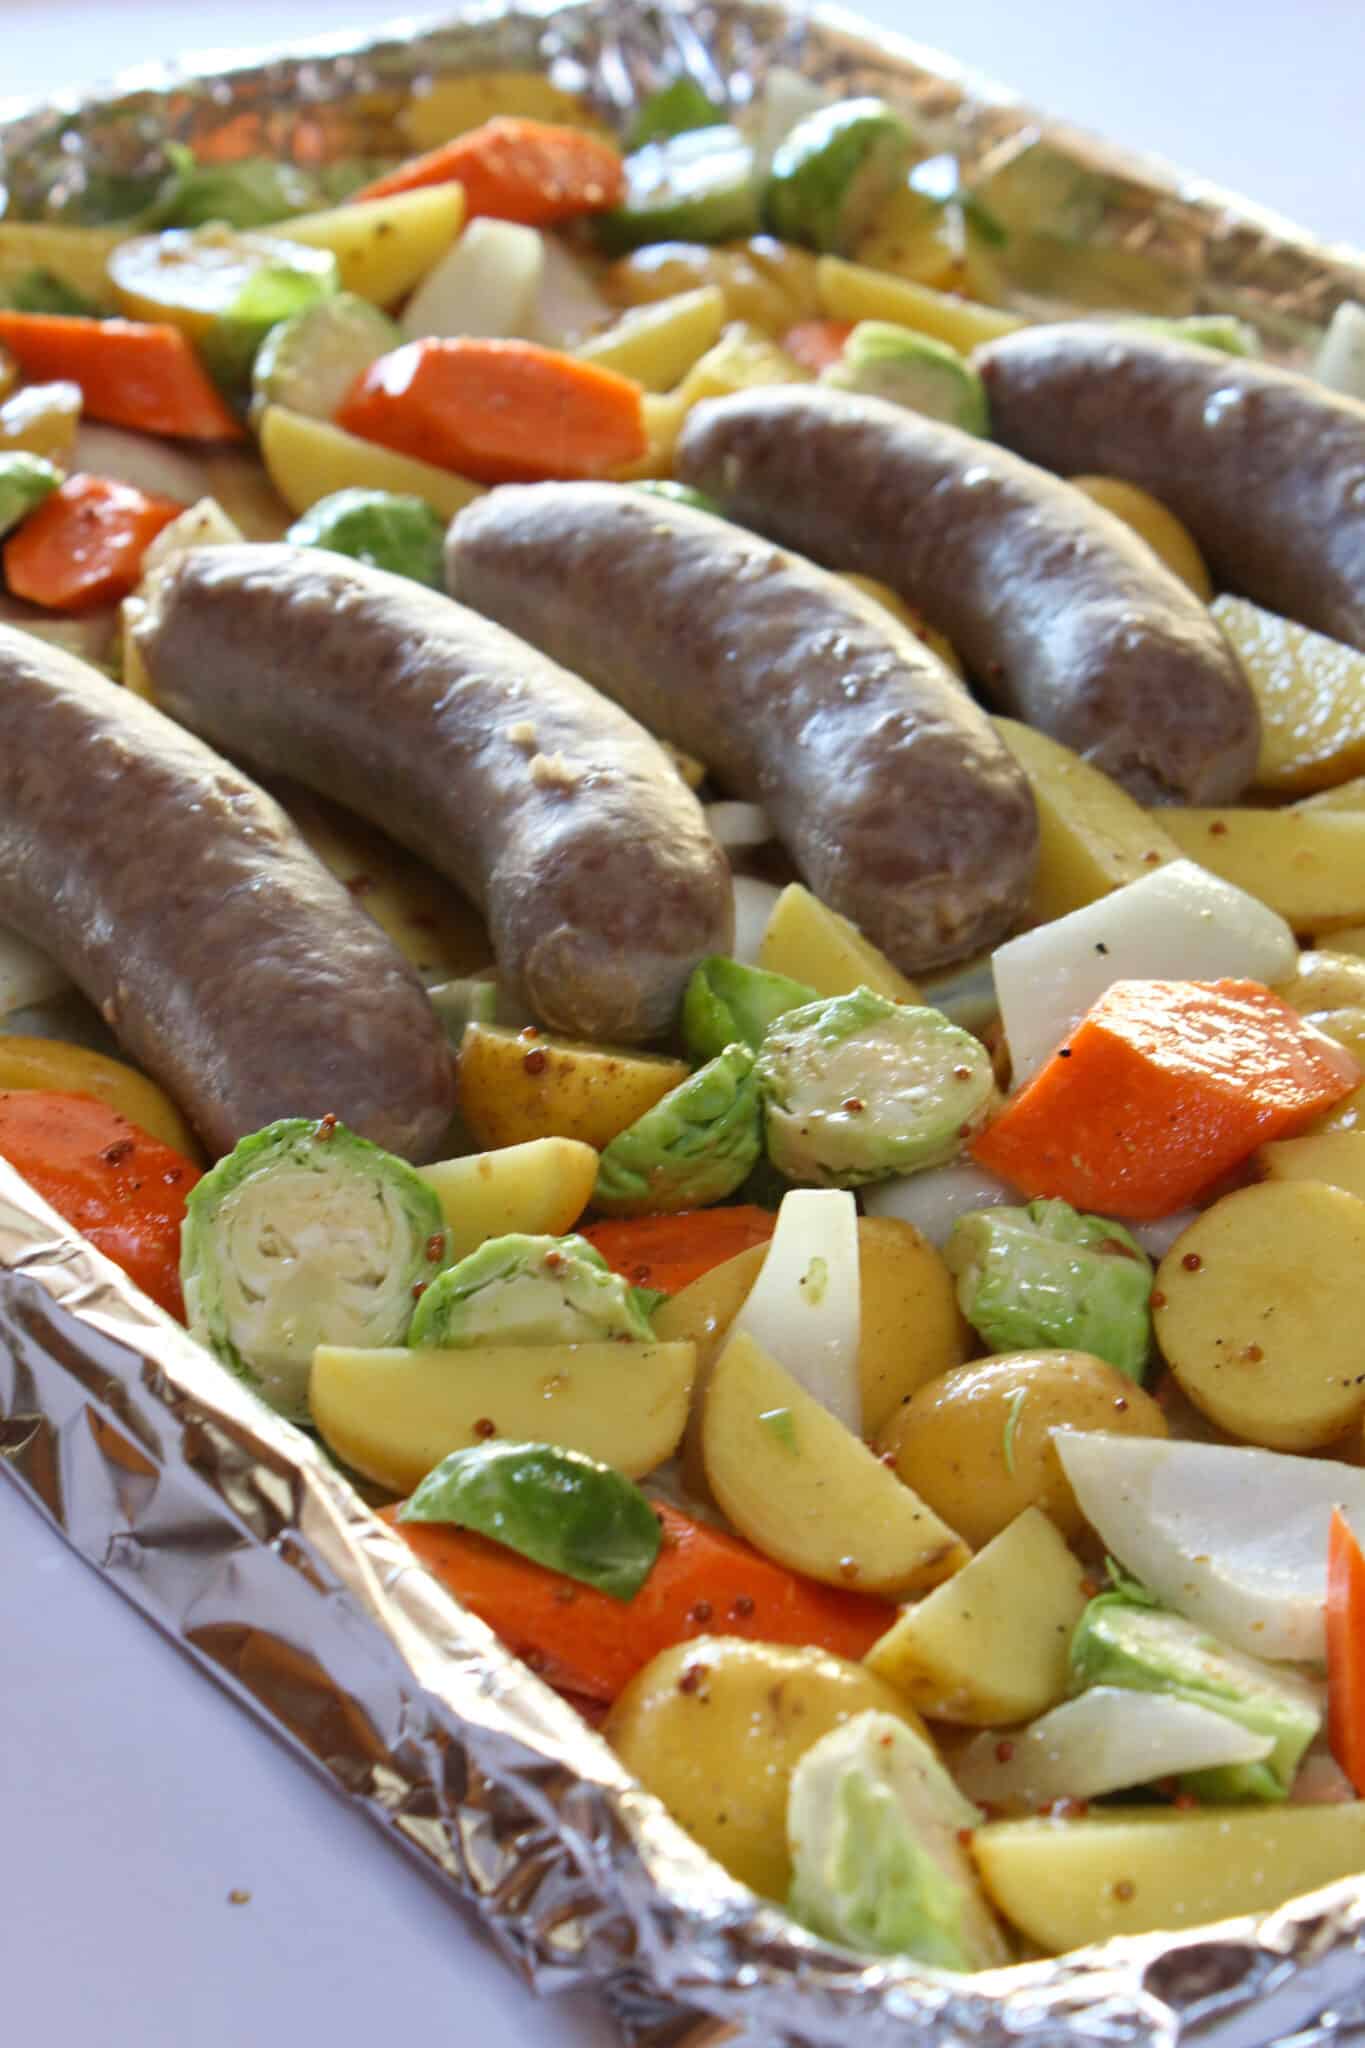 Sheet Pan Brats and Potatoes recipe for Oktoberfest dinner, featured by top US food blog, Practically Homemade